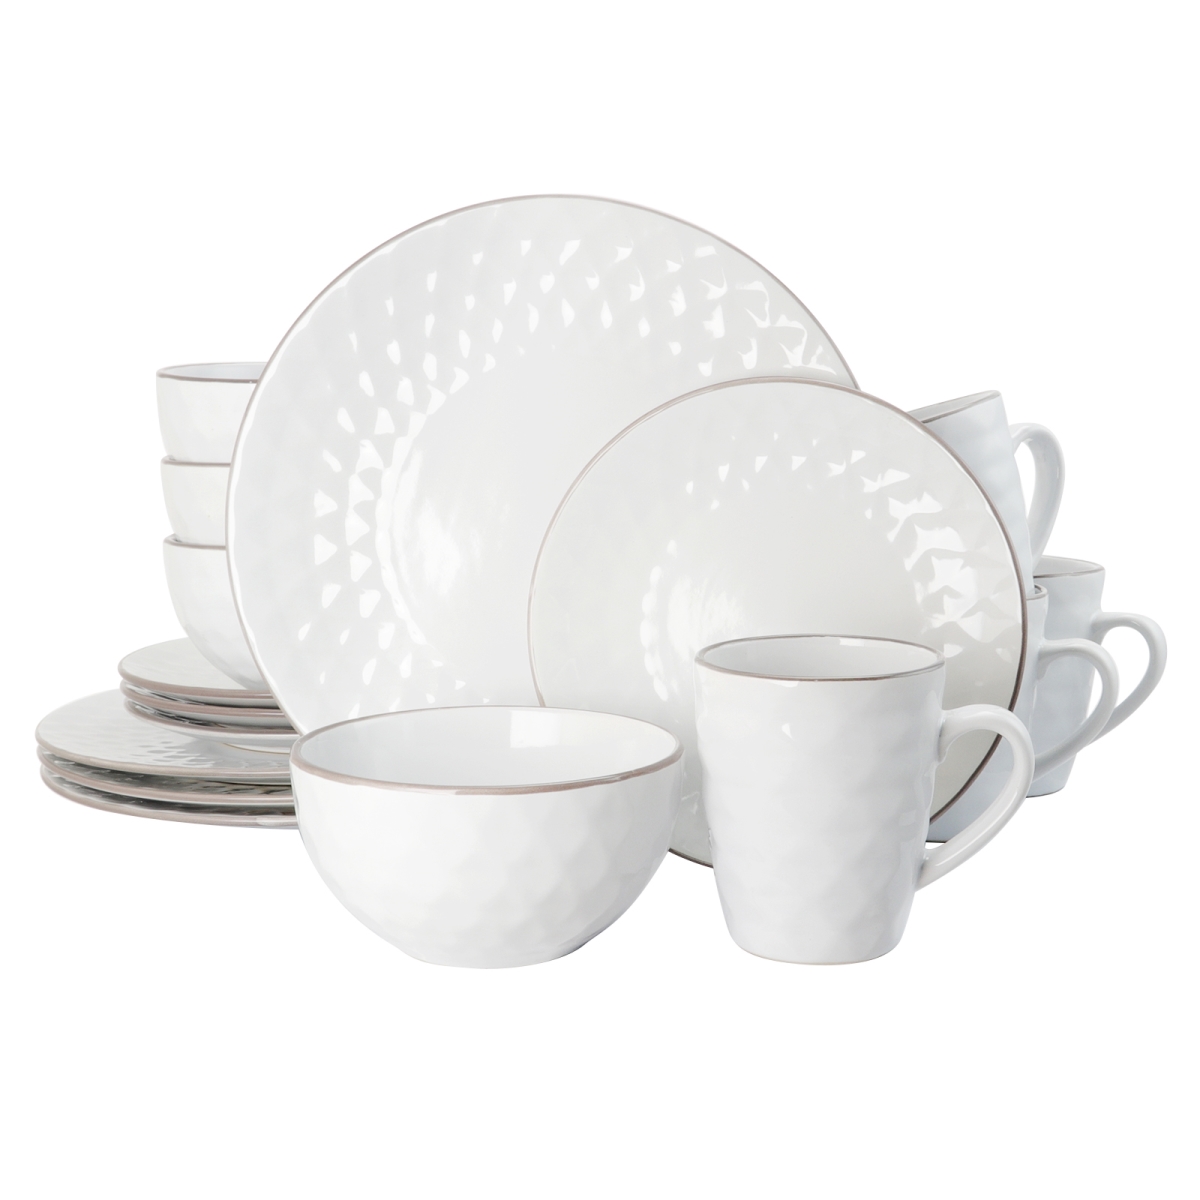 Picture of Elama EL-MEDICIPEARL Luxurious Medici Pearl Dinnerware Set in Slate & Stone Pearl with Setting for 4 - 16 Piece